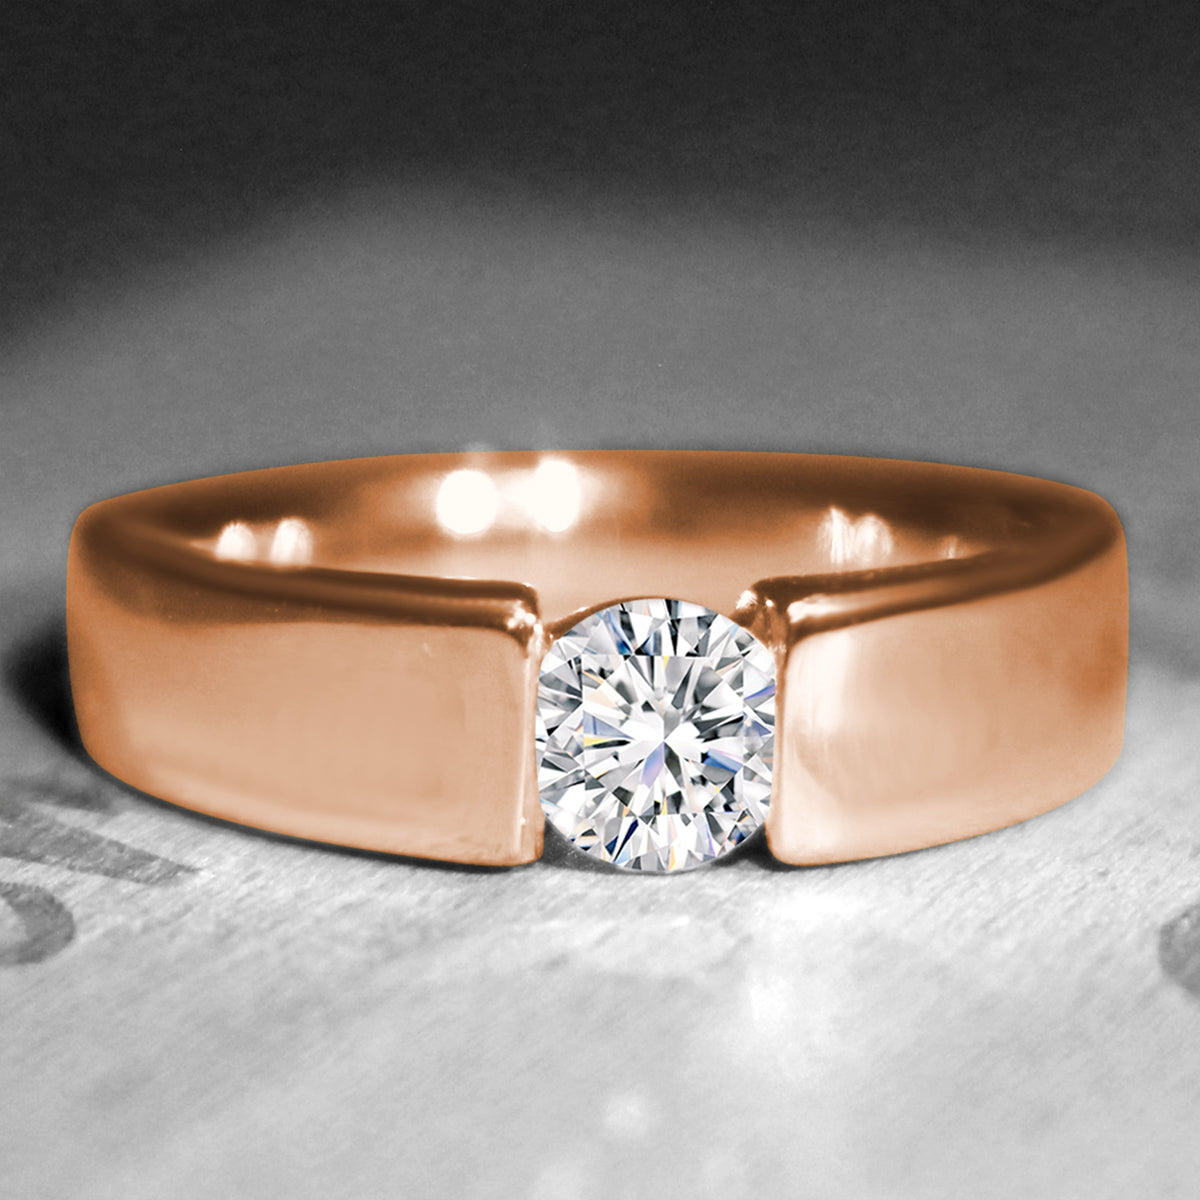 Buy quality Honey Comb Mens Diamond Ring in Rose Gold in Pune